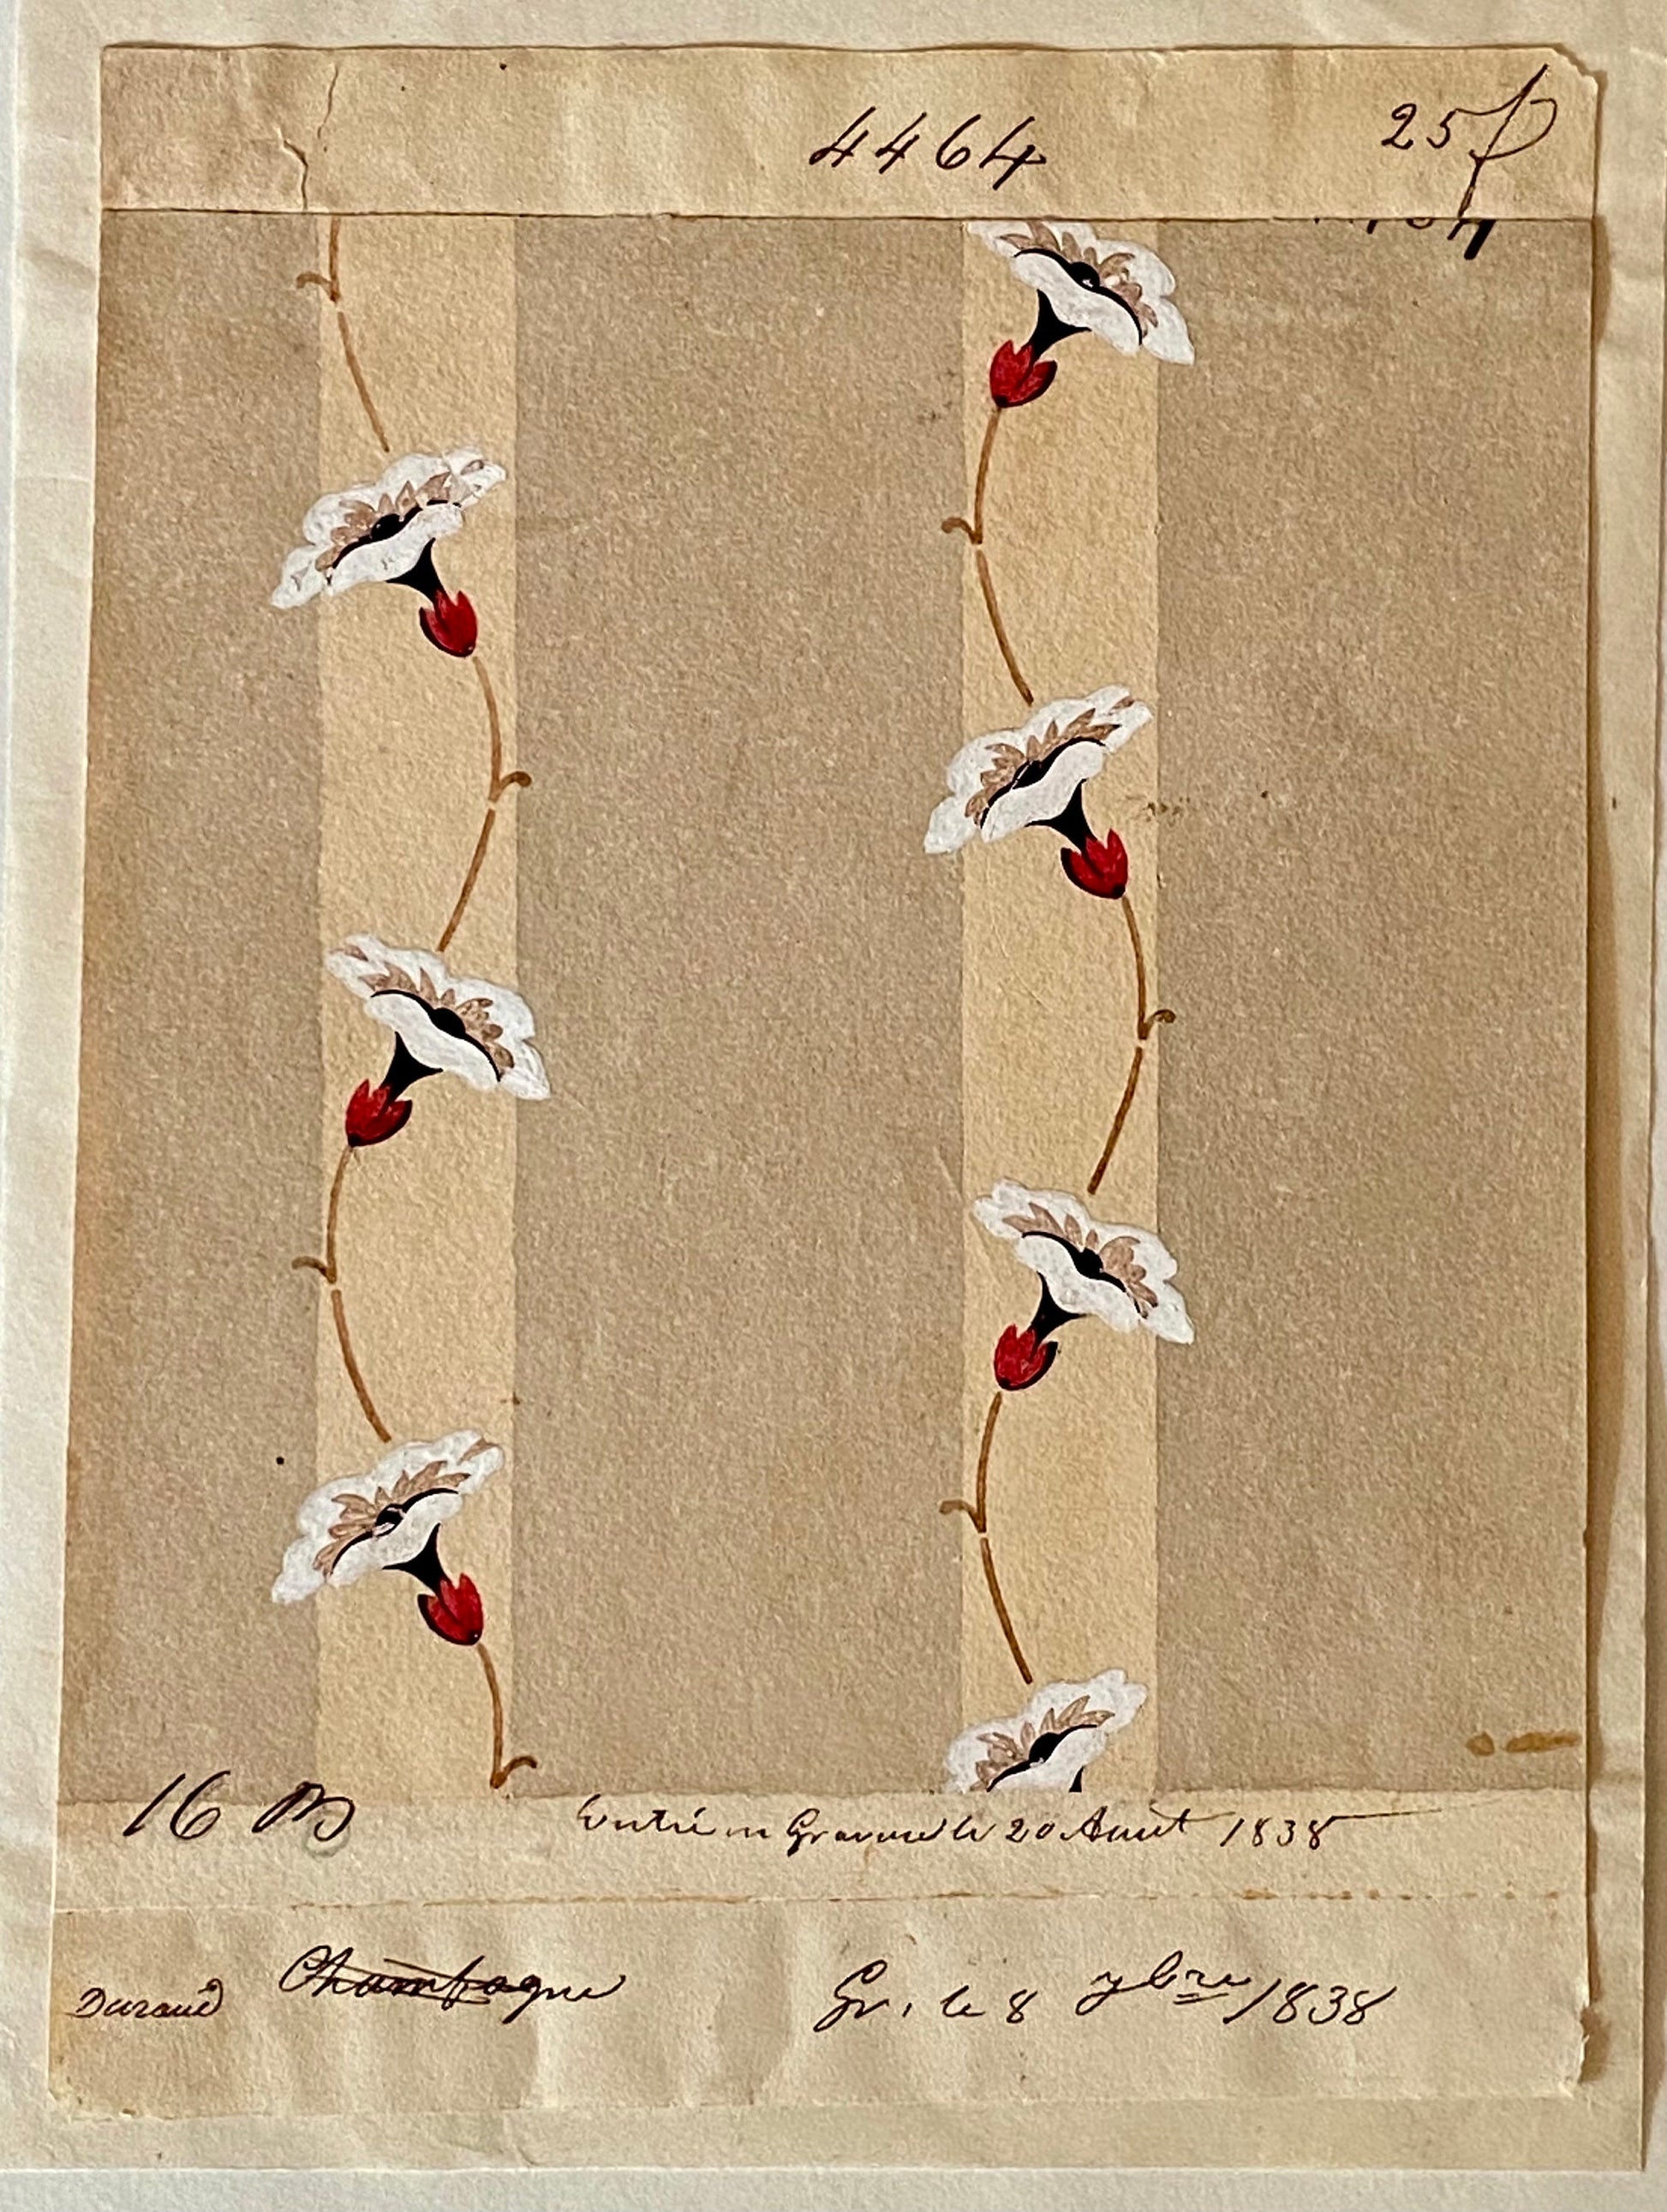 A Genuine 19th Century French Textile Design. Dated 1838. Mounted on Antique Paper. Size: 10.3 x 18.5 cms.